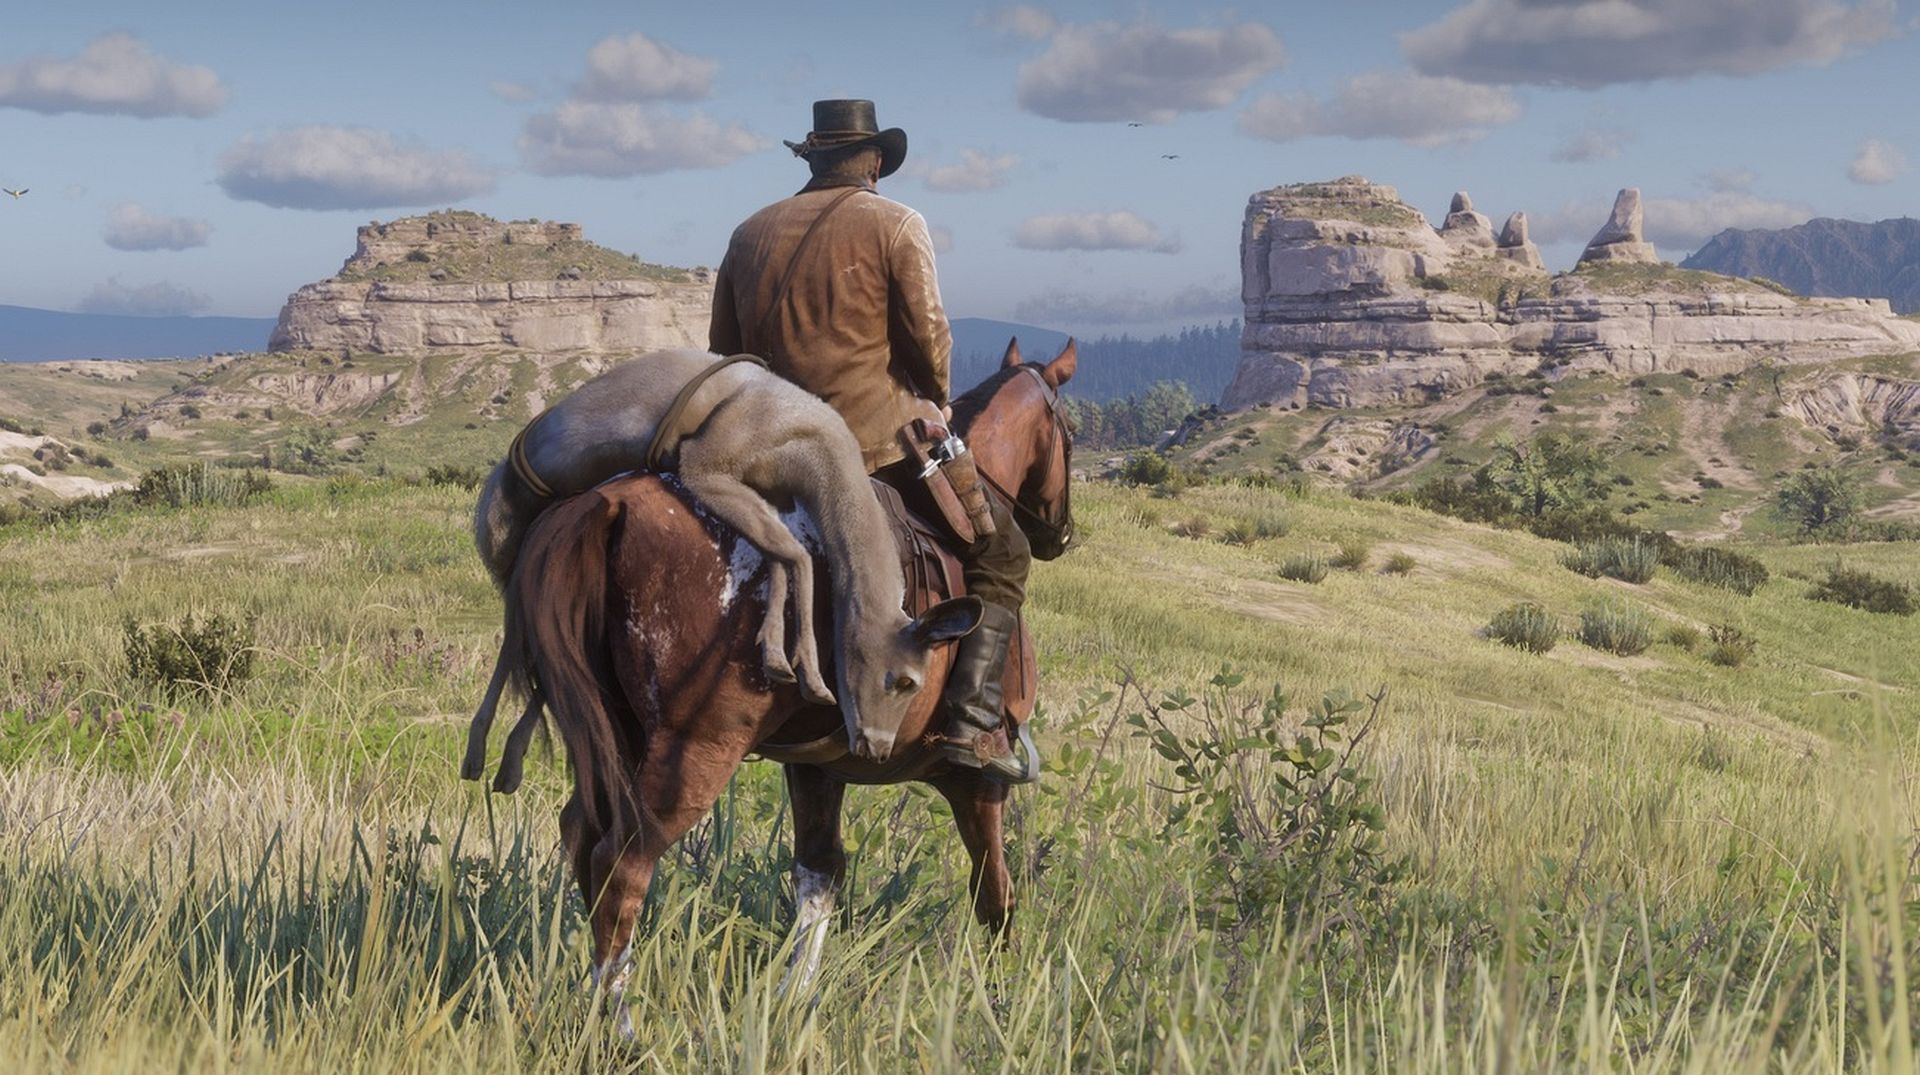 Red Dead Redemption 2 tips tricks - techniques and hidden commands you might not know | VG247